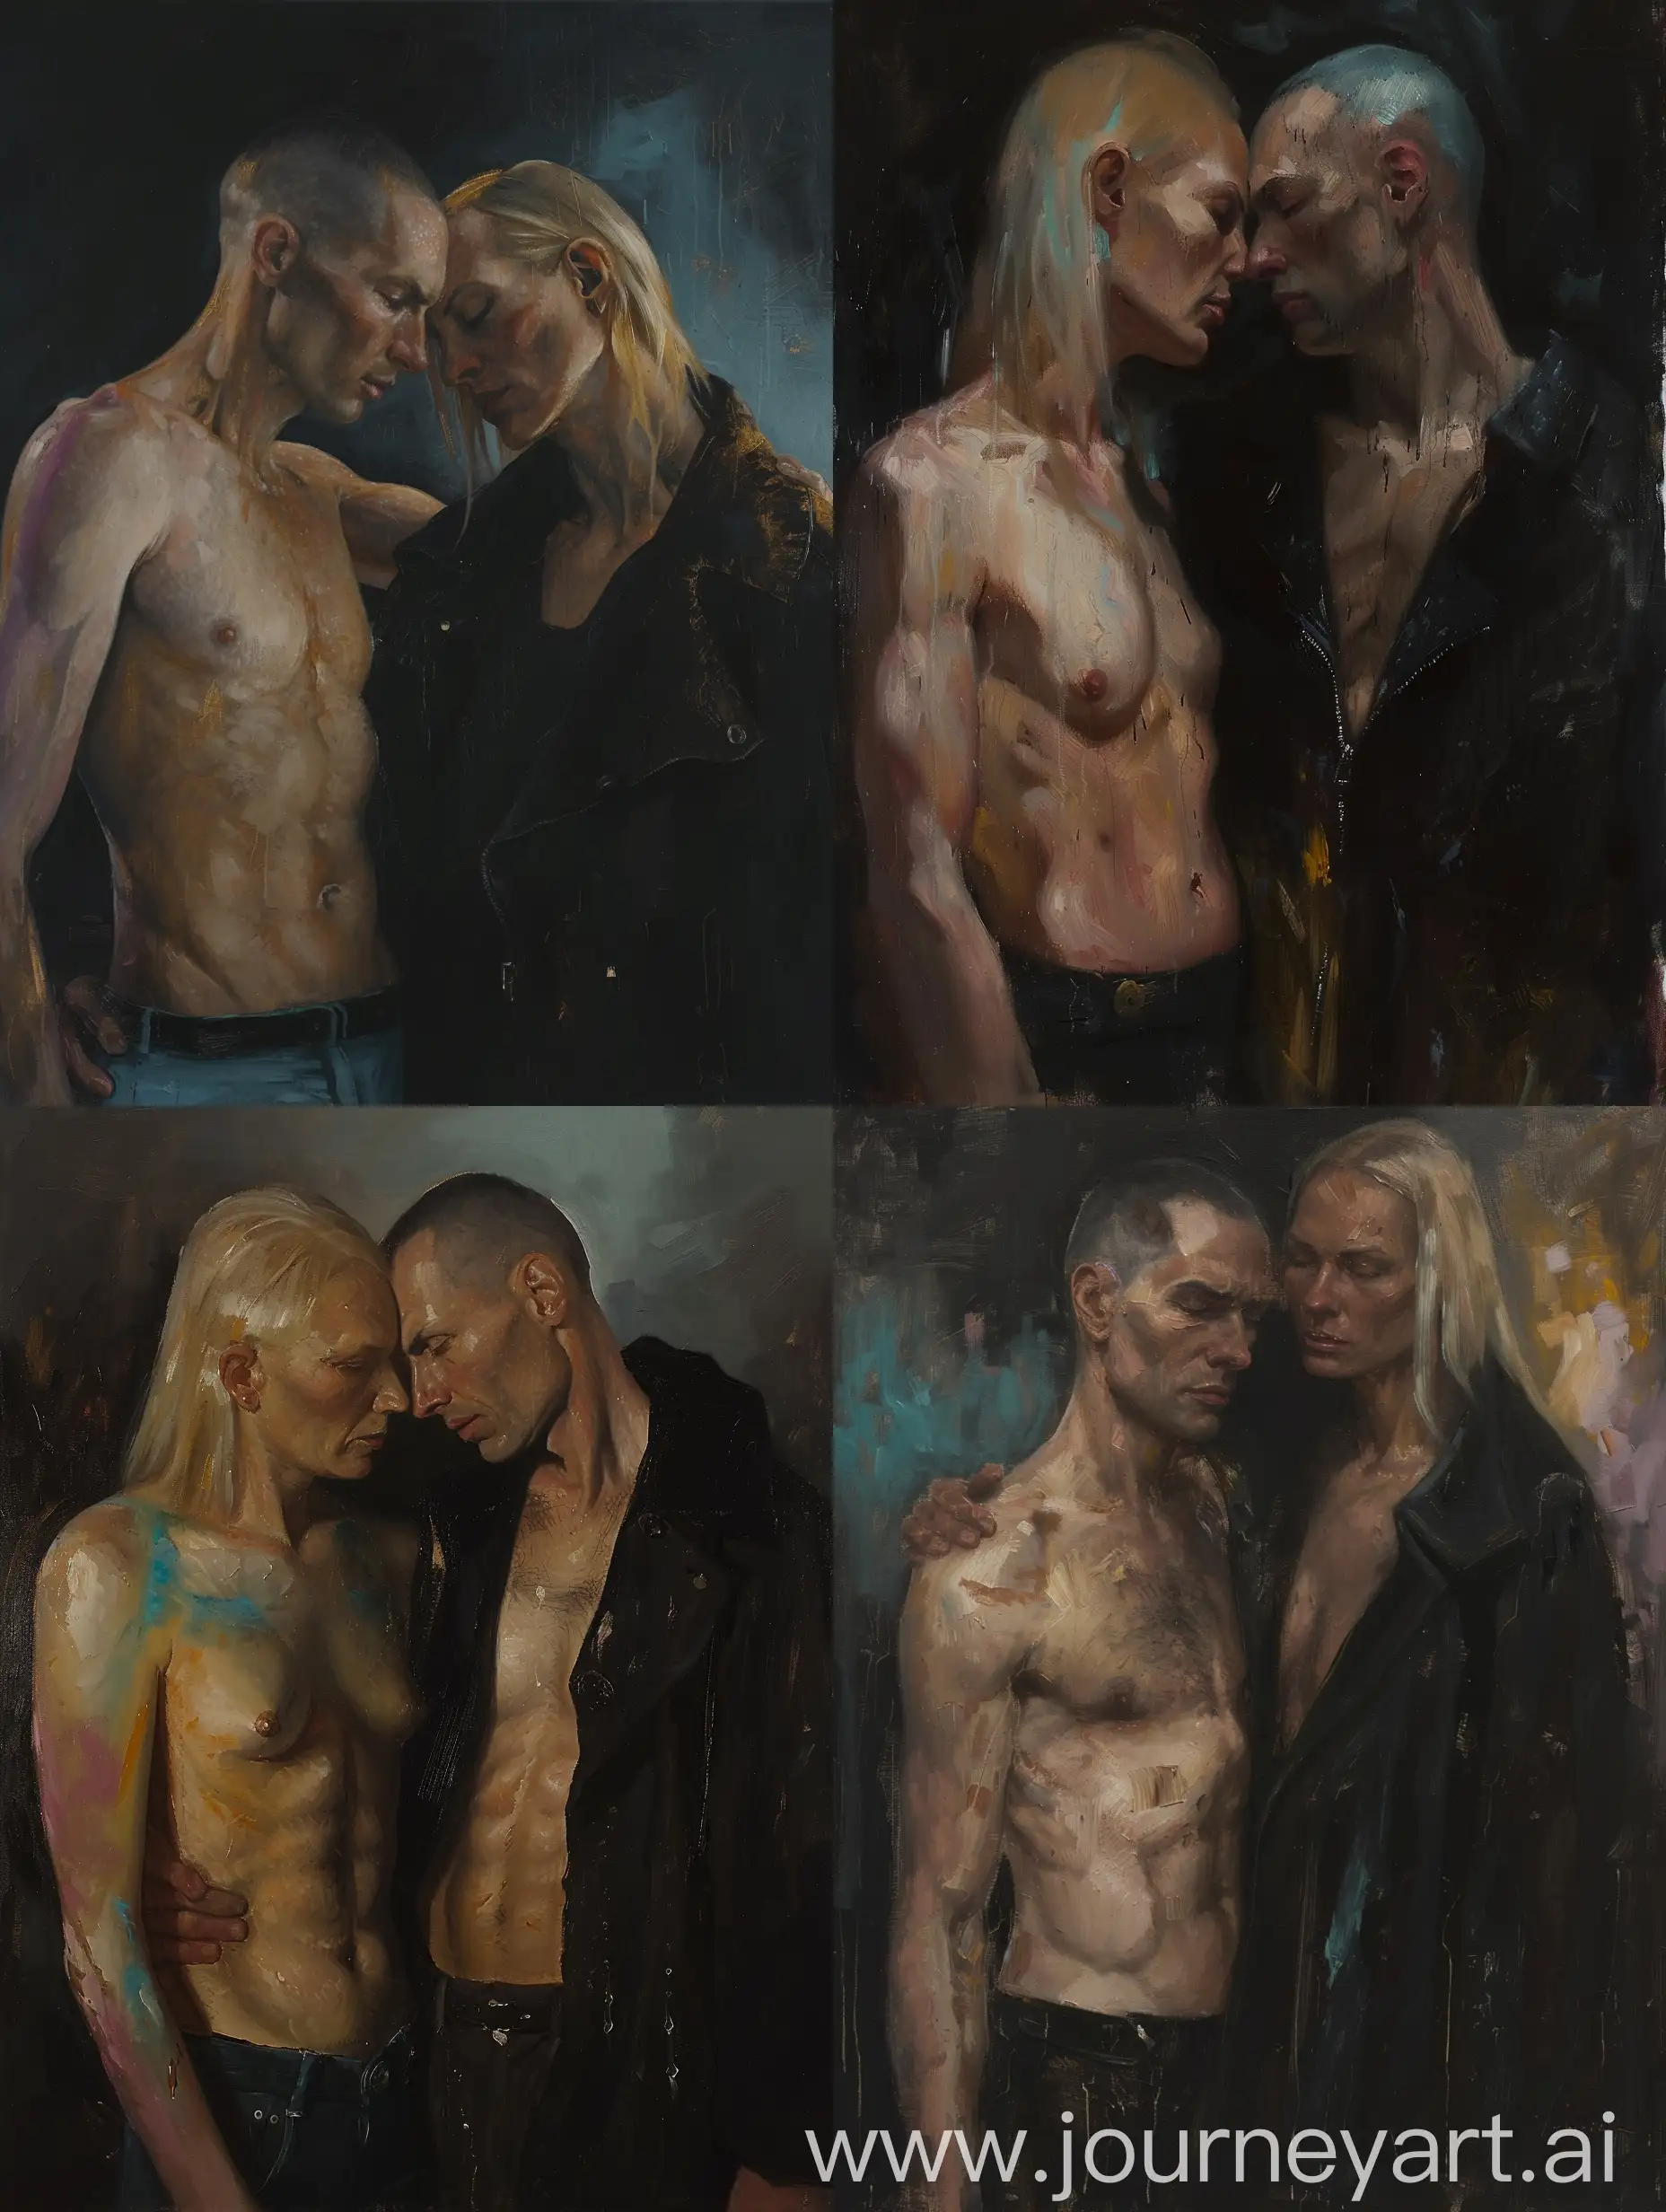 Intimate-Embrace-Emotional-Connection-Between-Two-Figures-in-Oil-Painting